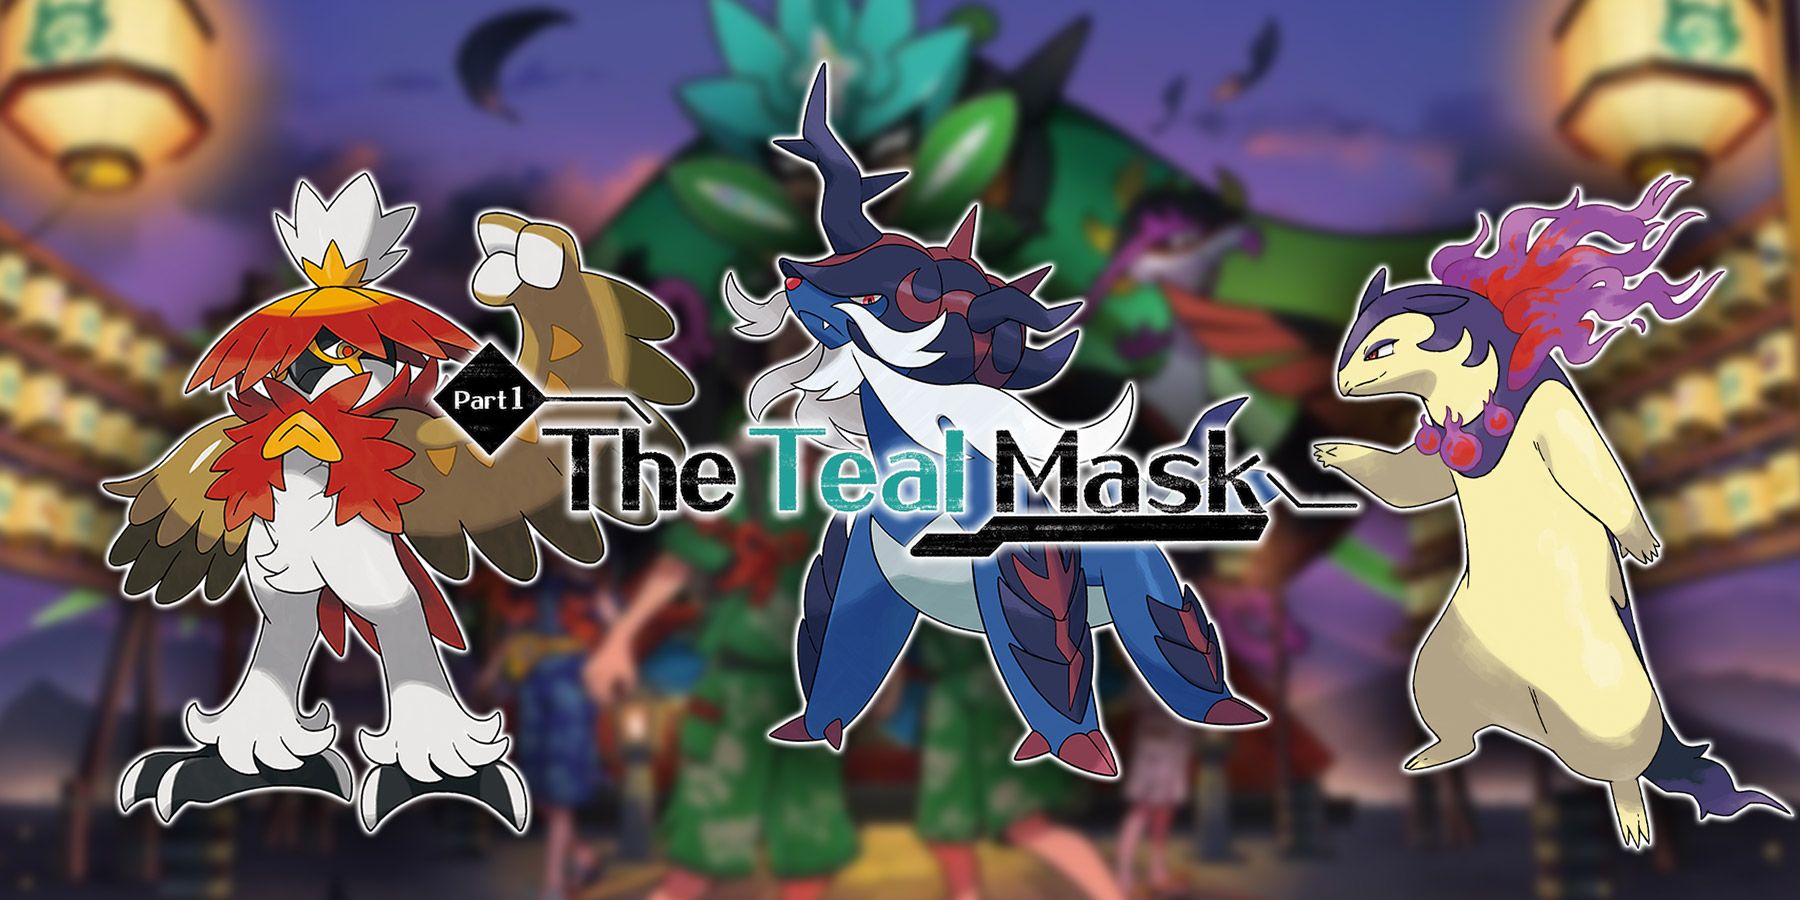 Pokemon Scarlet and Violet's Teal Mask DLC is the Place to Let